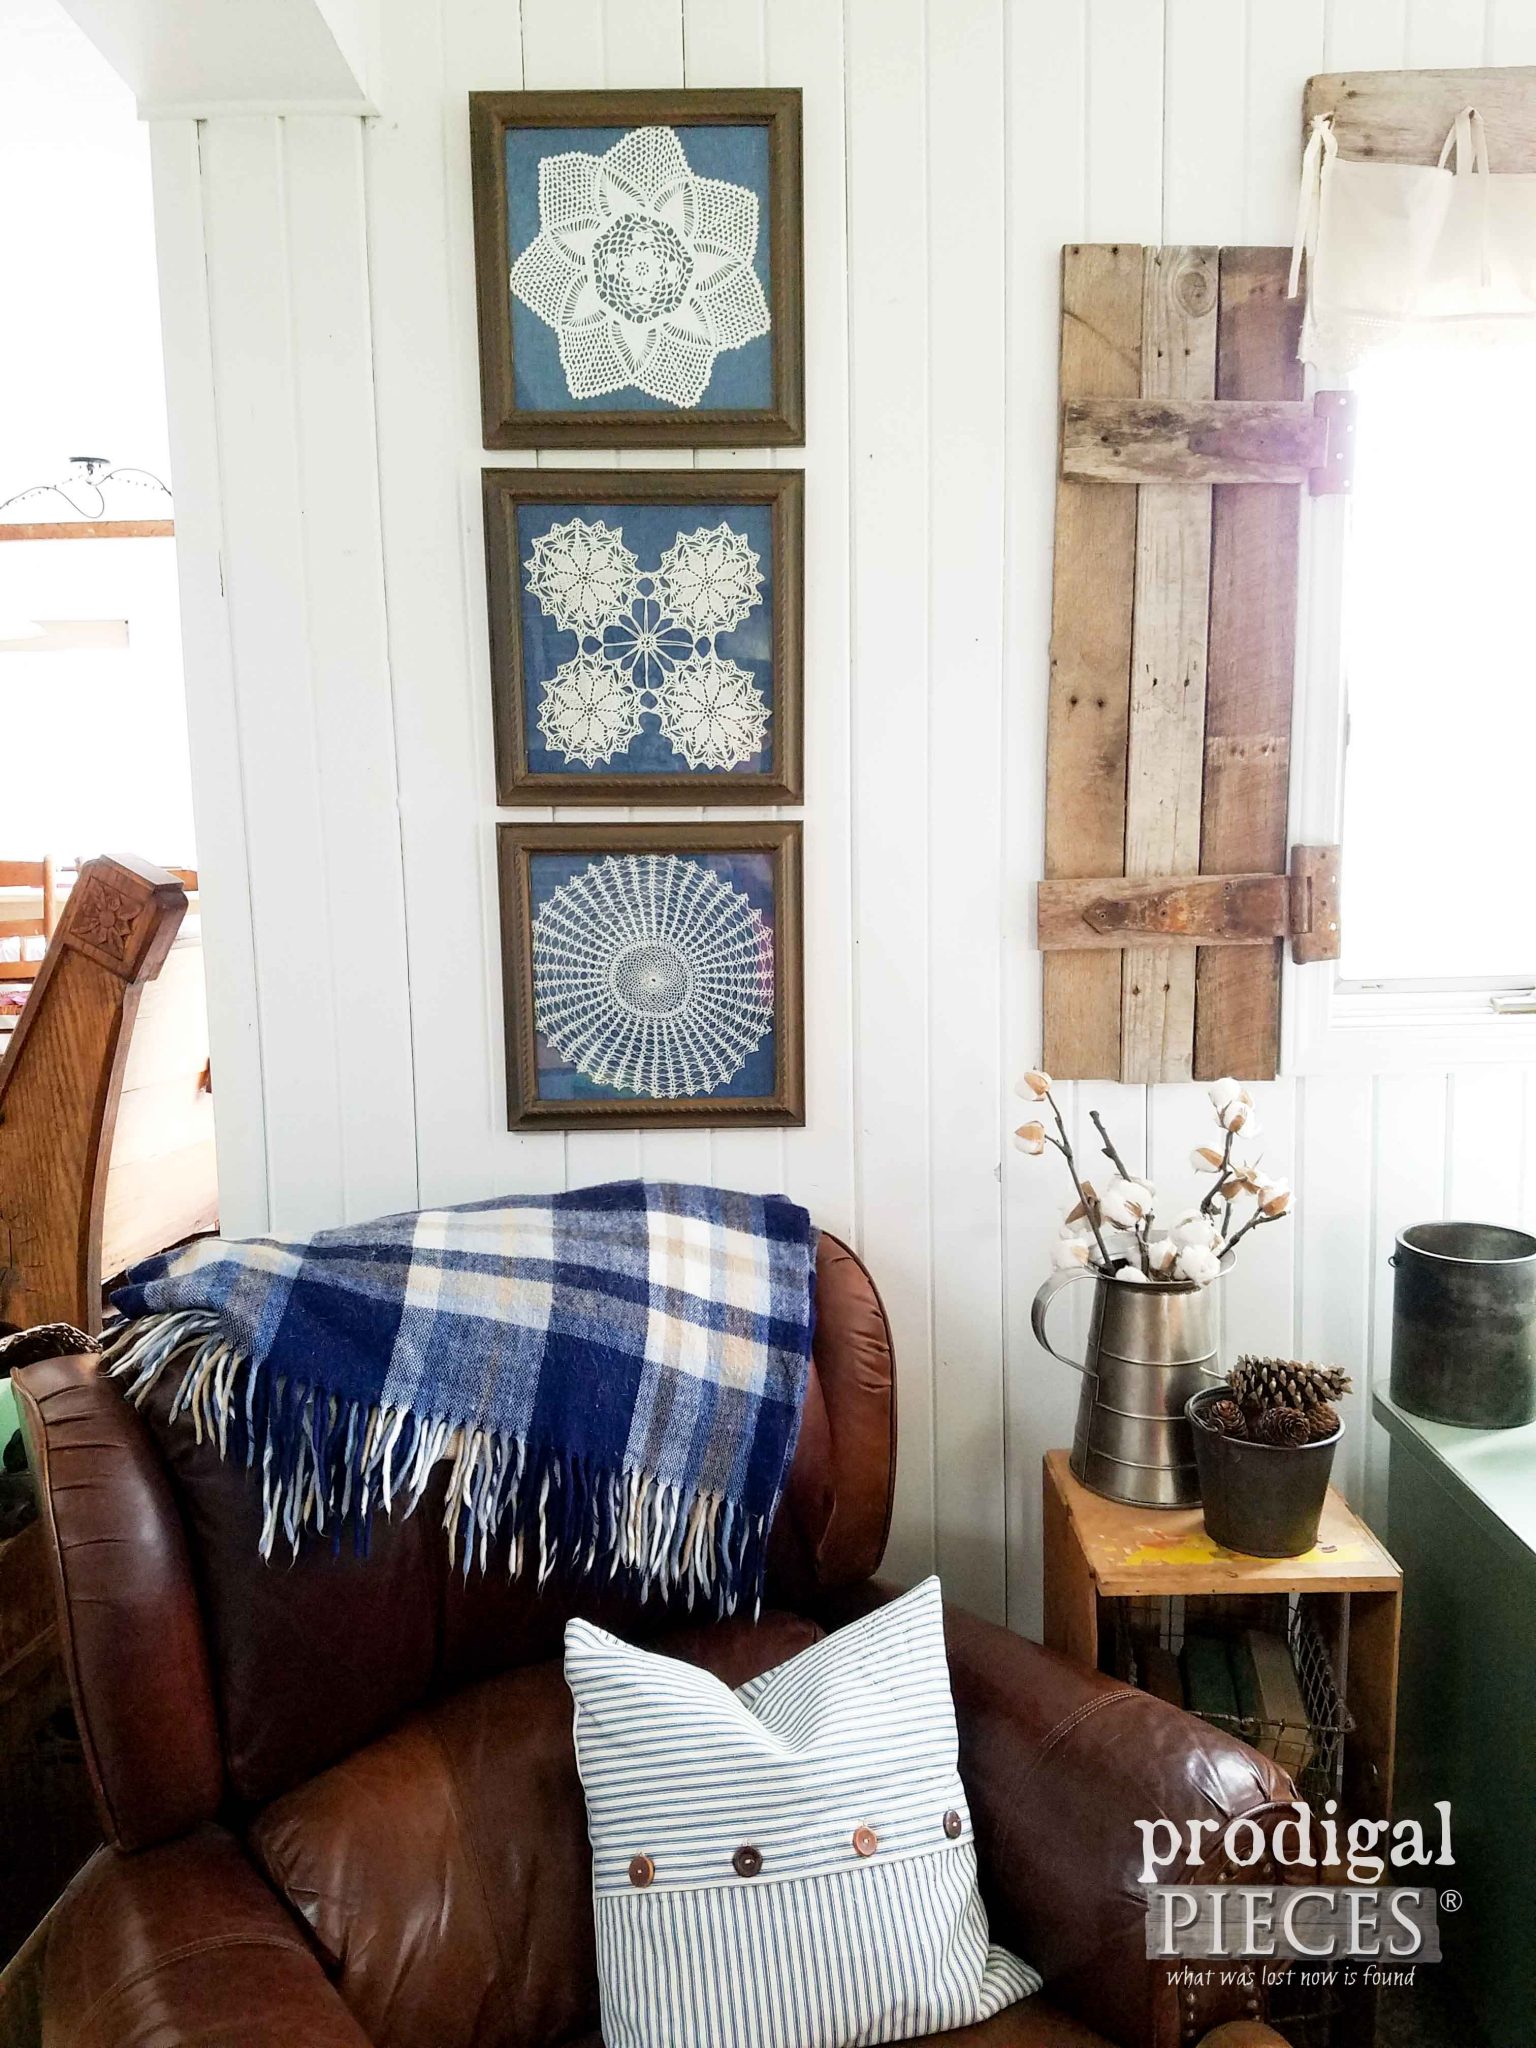 Framed Doily Wall Art from Curbside Finds by Prodigal Pieces | prodigalpieces.com